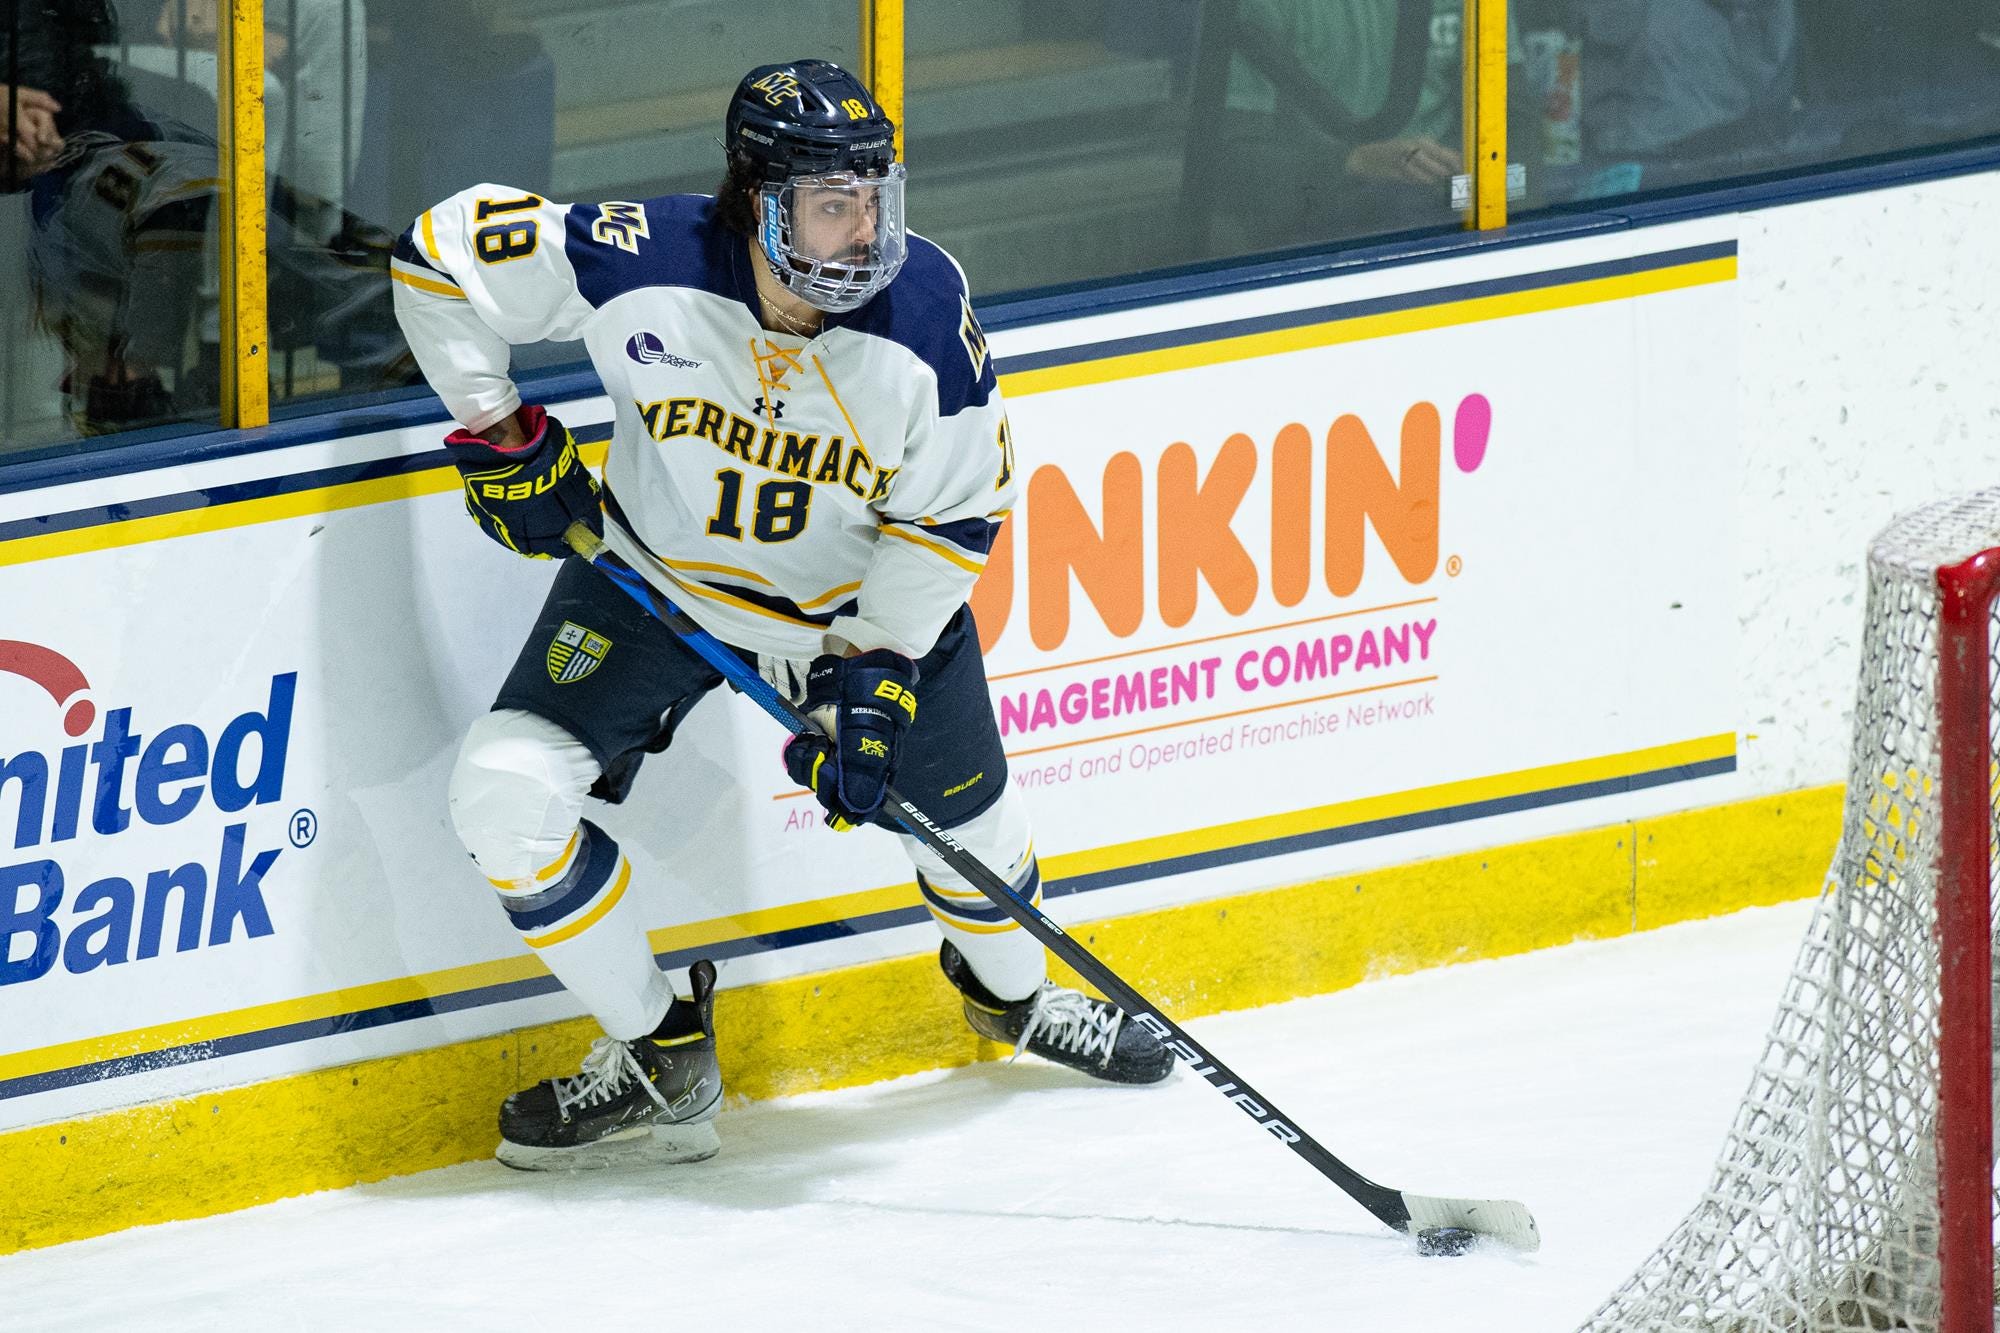 Ben Brar signs with the Florida Everblades